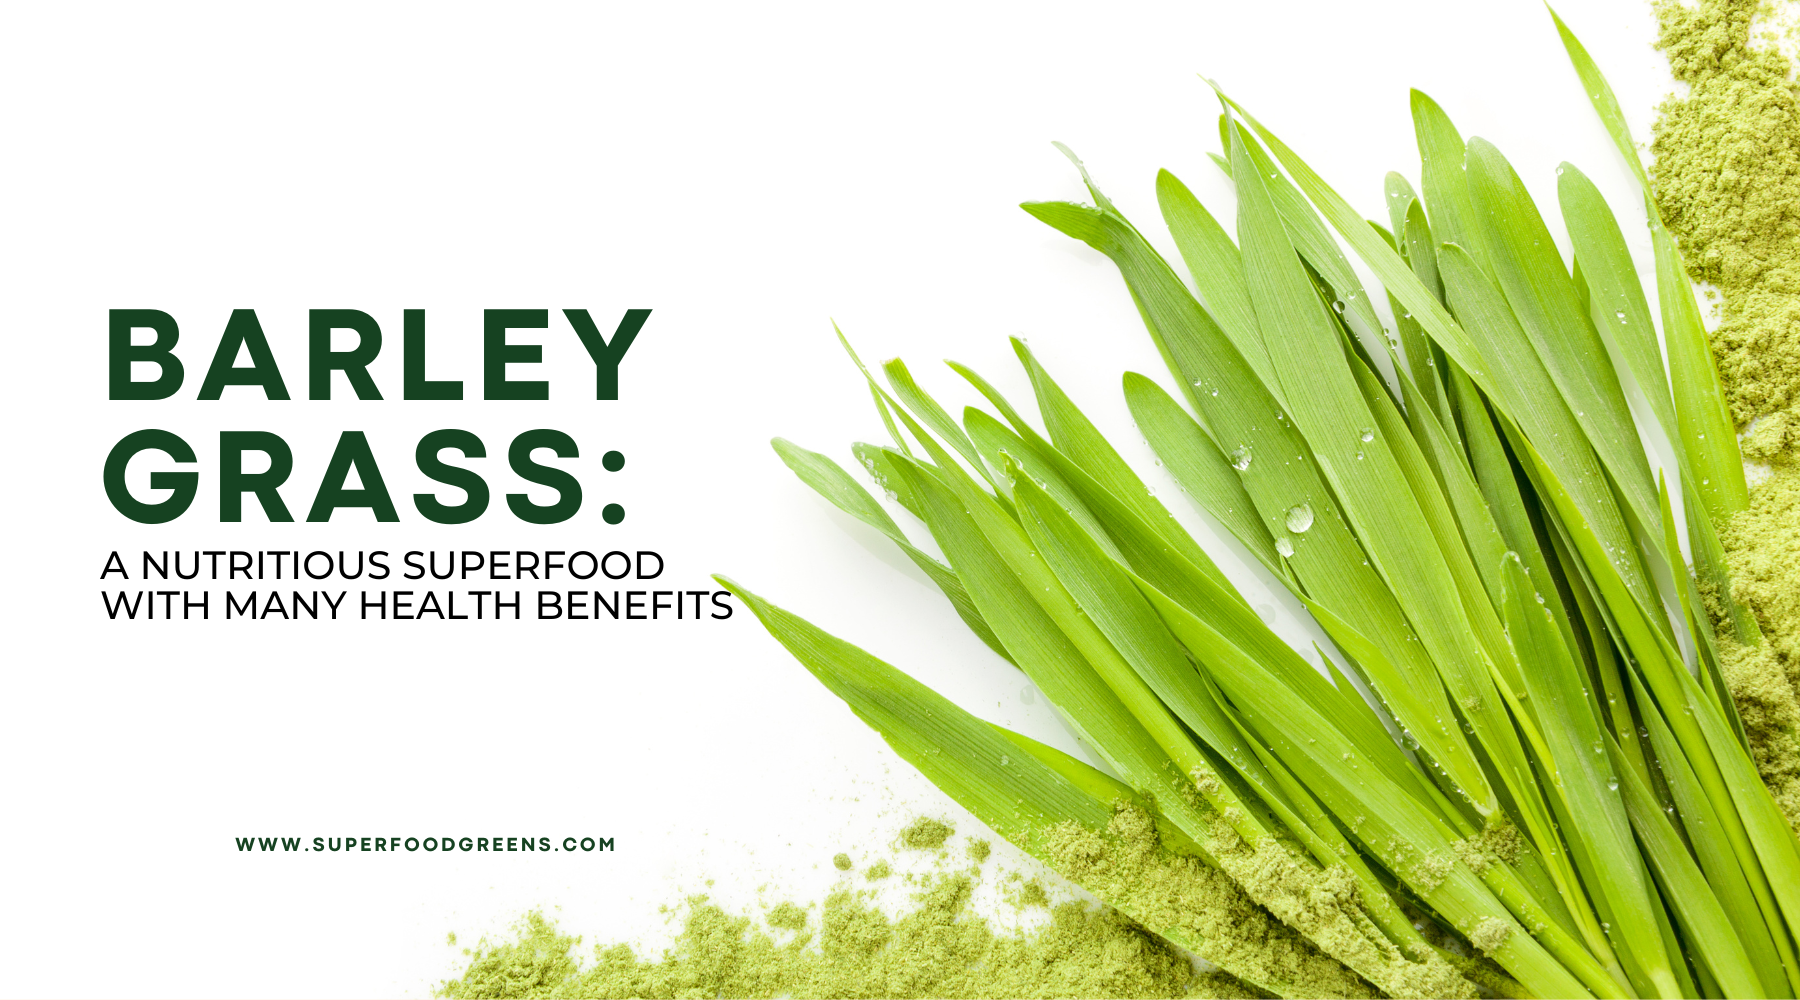  Barley Grass Juice Powder: A Superfood with Many Health Benefits | Barley grass juice powder